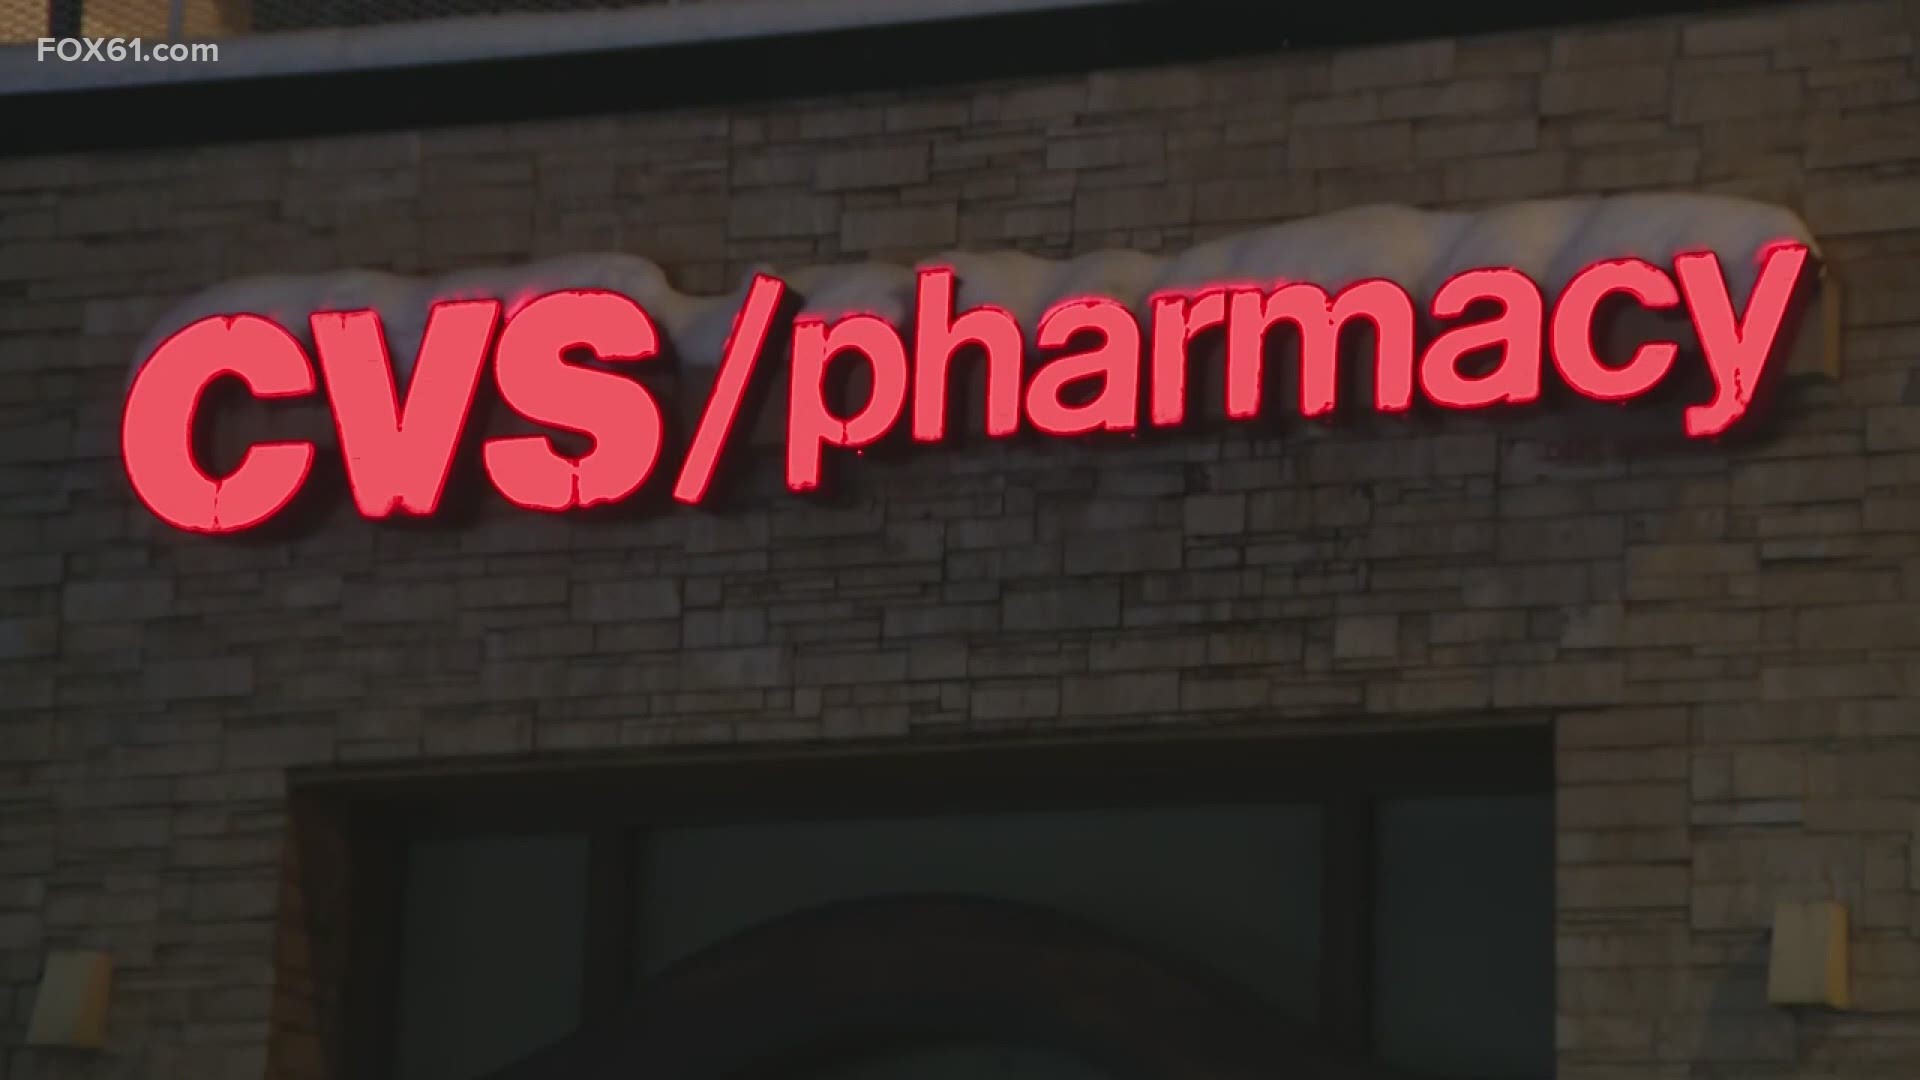 A group of people aged 75+ were turned away from a Connecticut CVS when they arrived with COVID-19 vaccine appointments